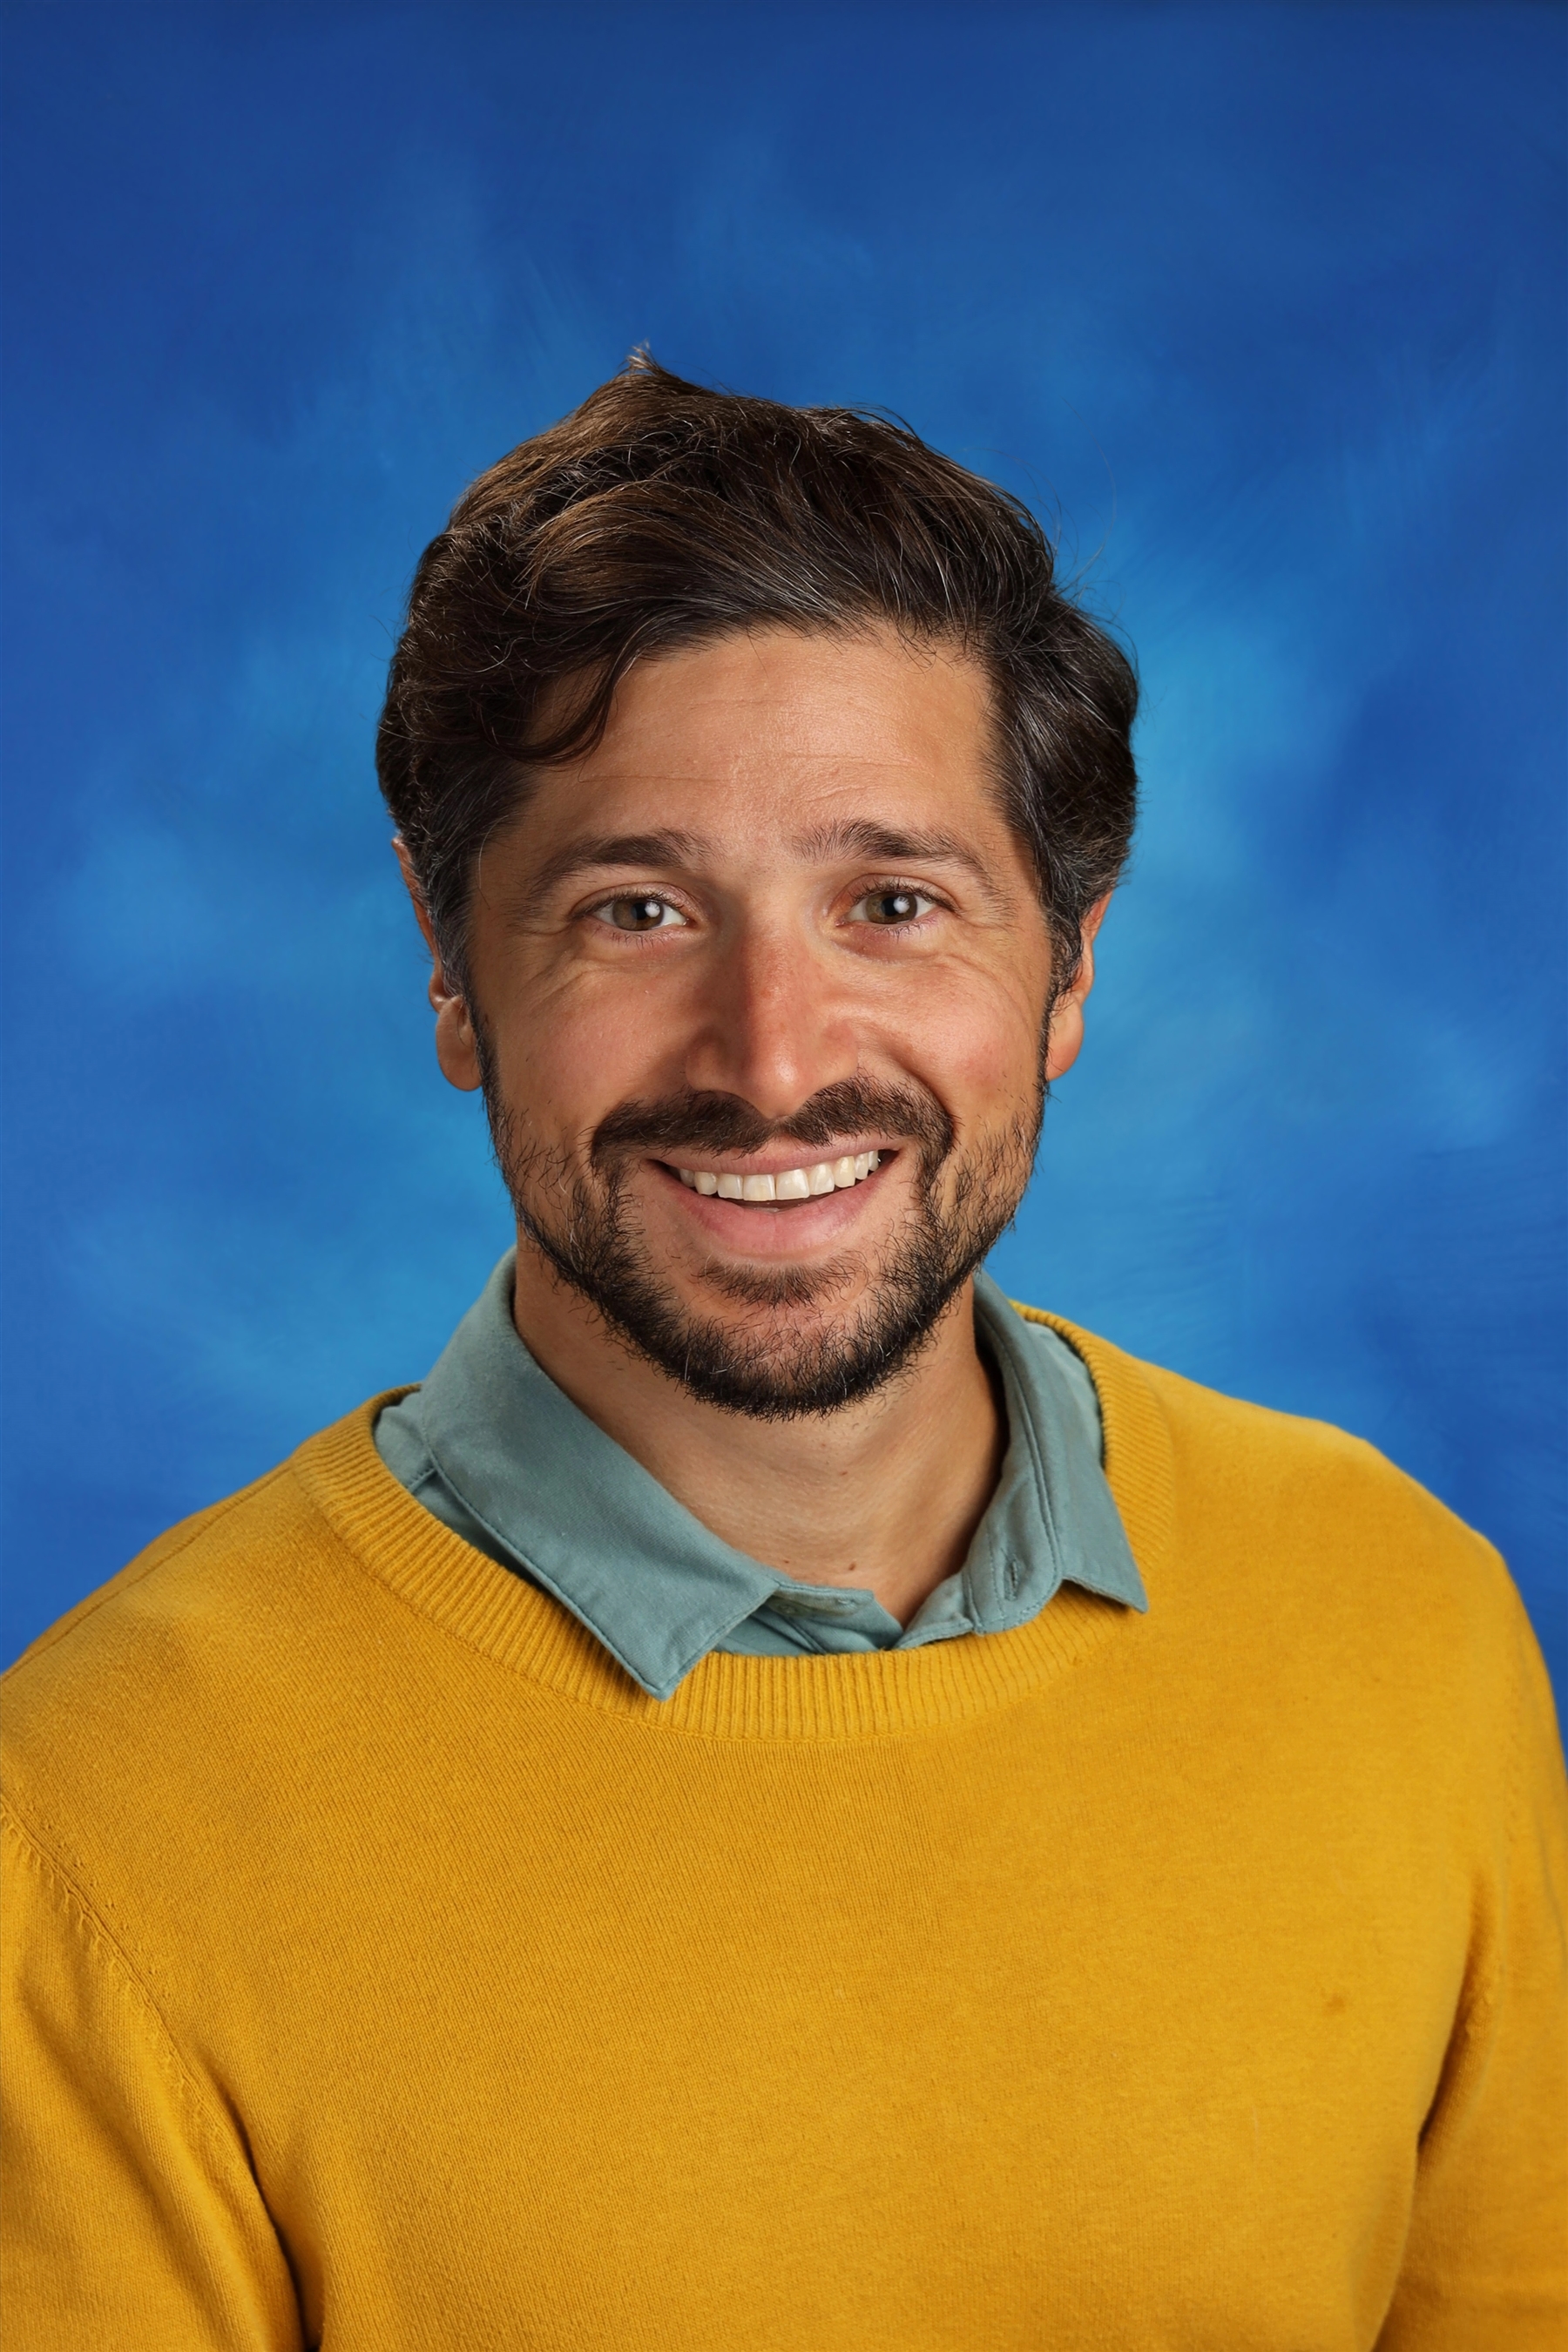 Anthony Aceti wears a yellow sweater on a blue background while smiling warmly.